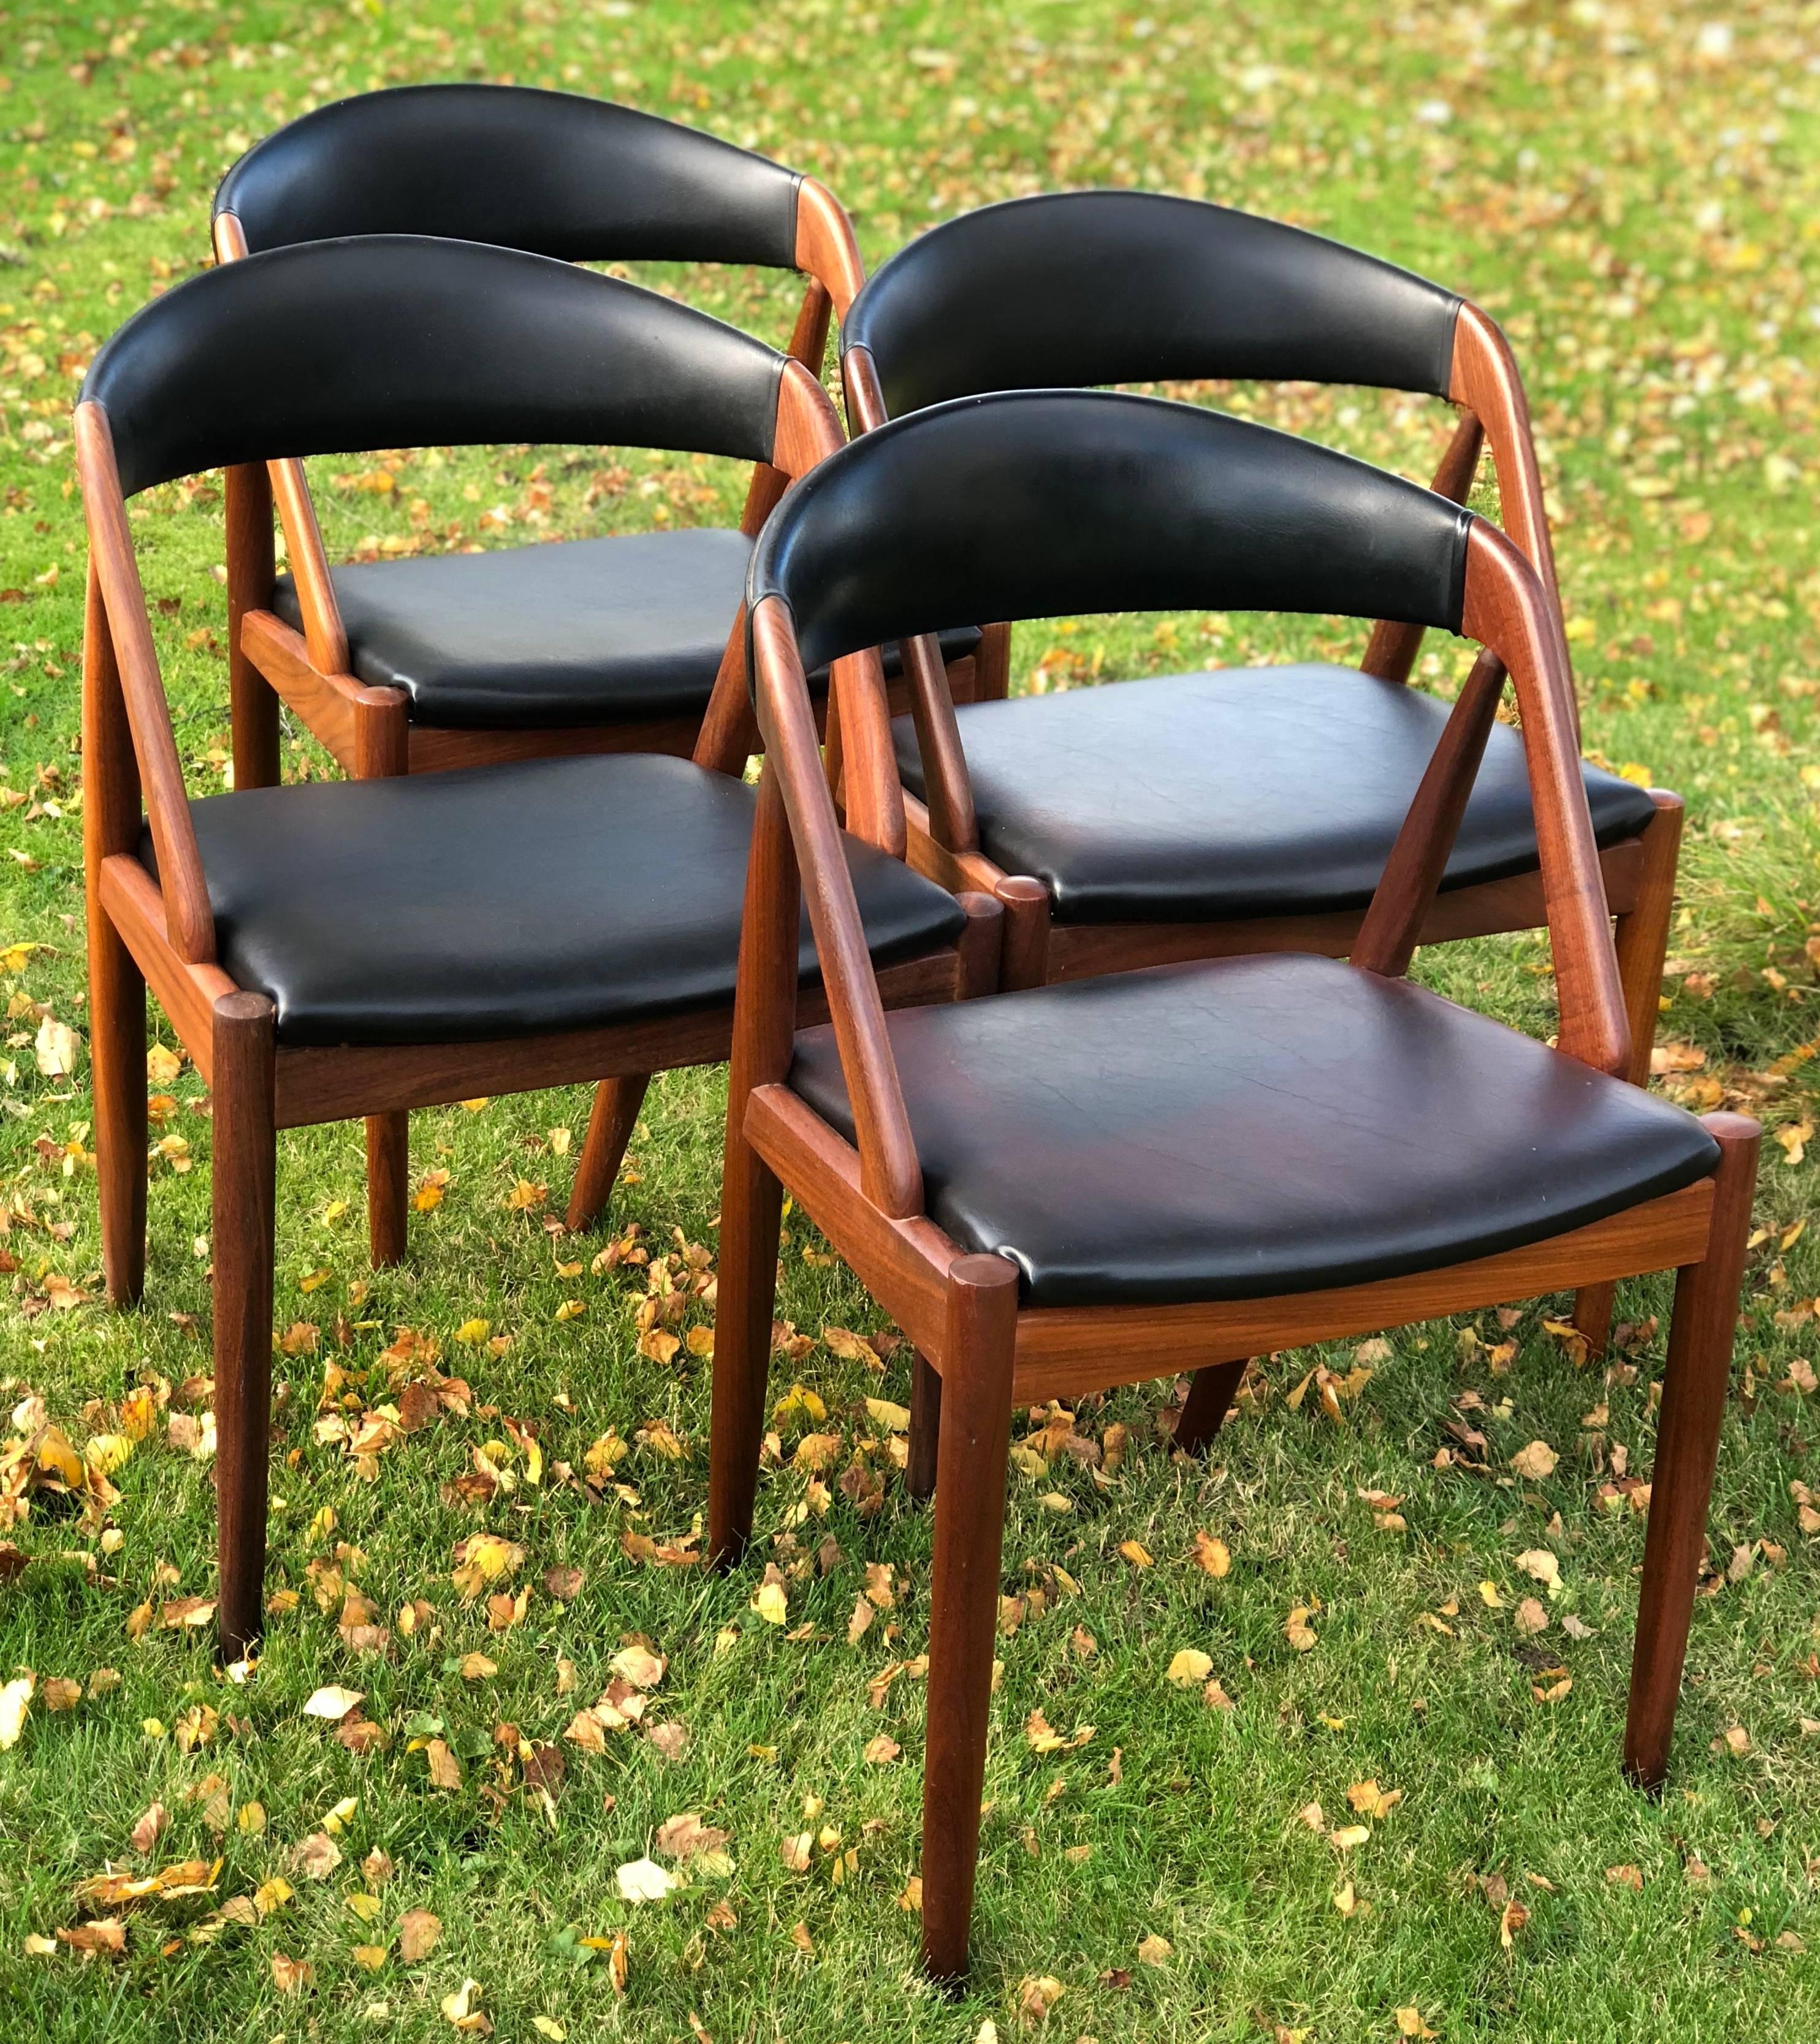 Set of four dining #31 chairs by Kai Kristiansen for Schou Møbelfabrik, Denmark. The frame is made of teak and the seats and backrests are covered in the original black skai. Seats have been recovered more recently. This model features a deep curved